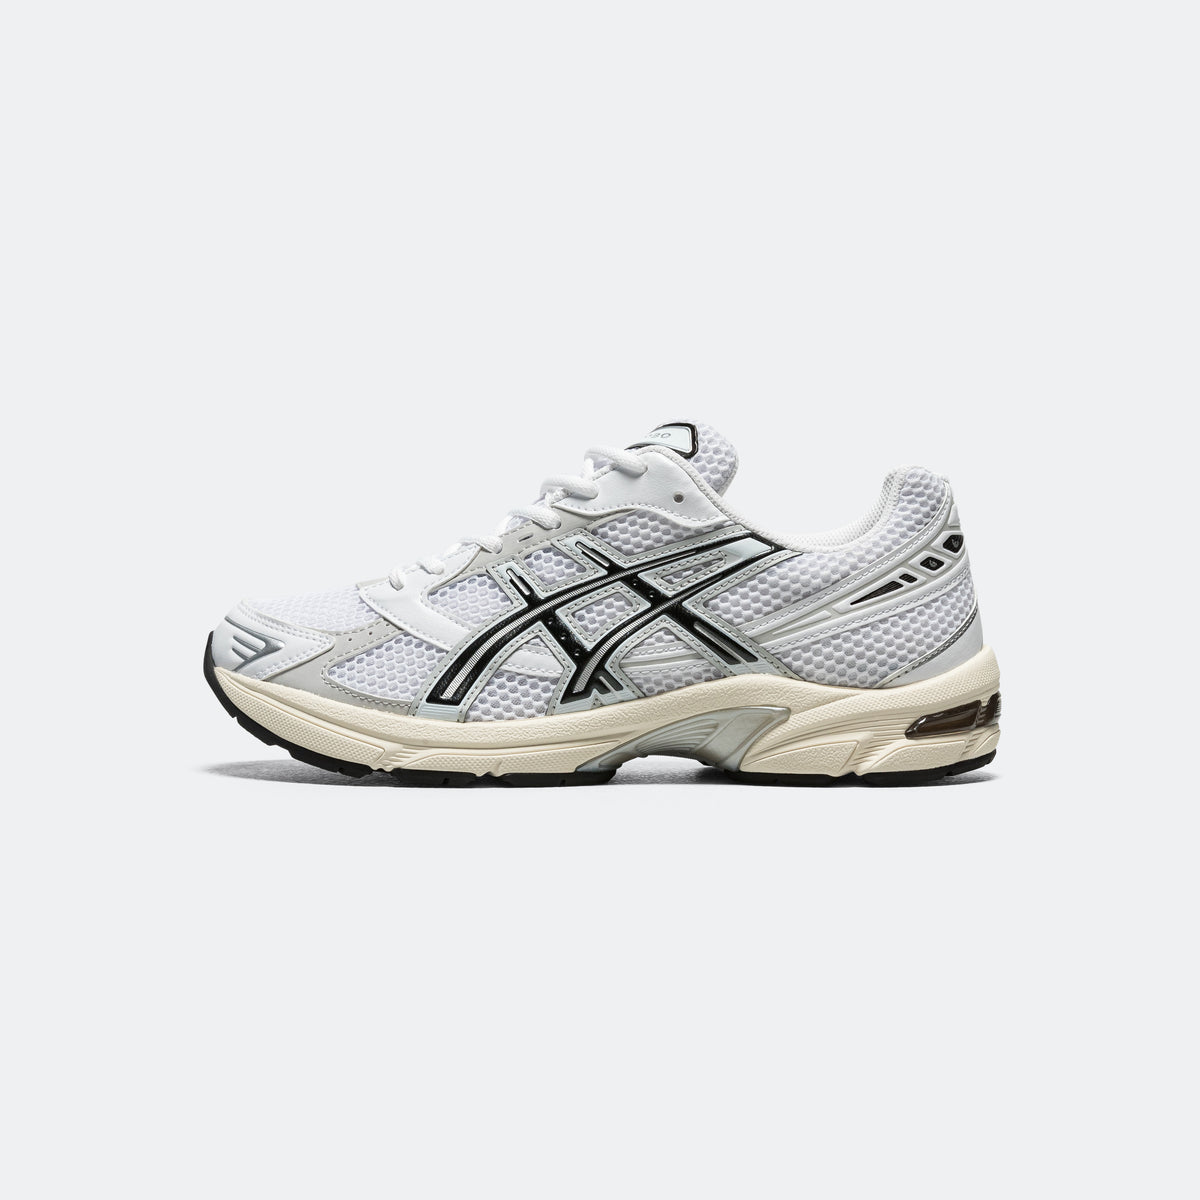 ASICS GEL-1130 - White/Cloud Grey | UP THERE